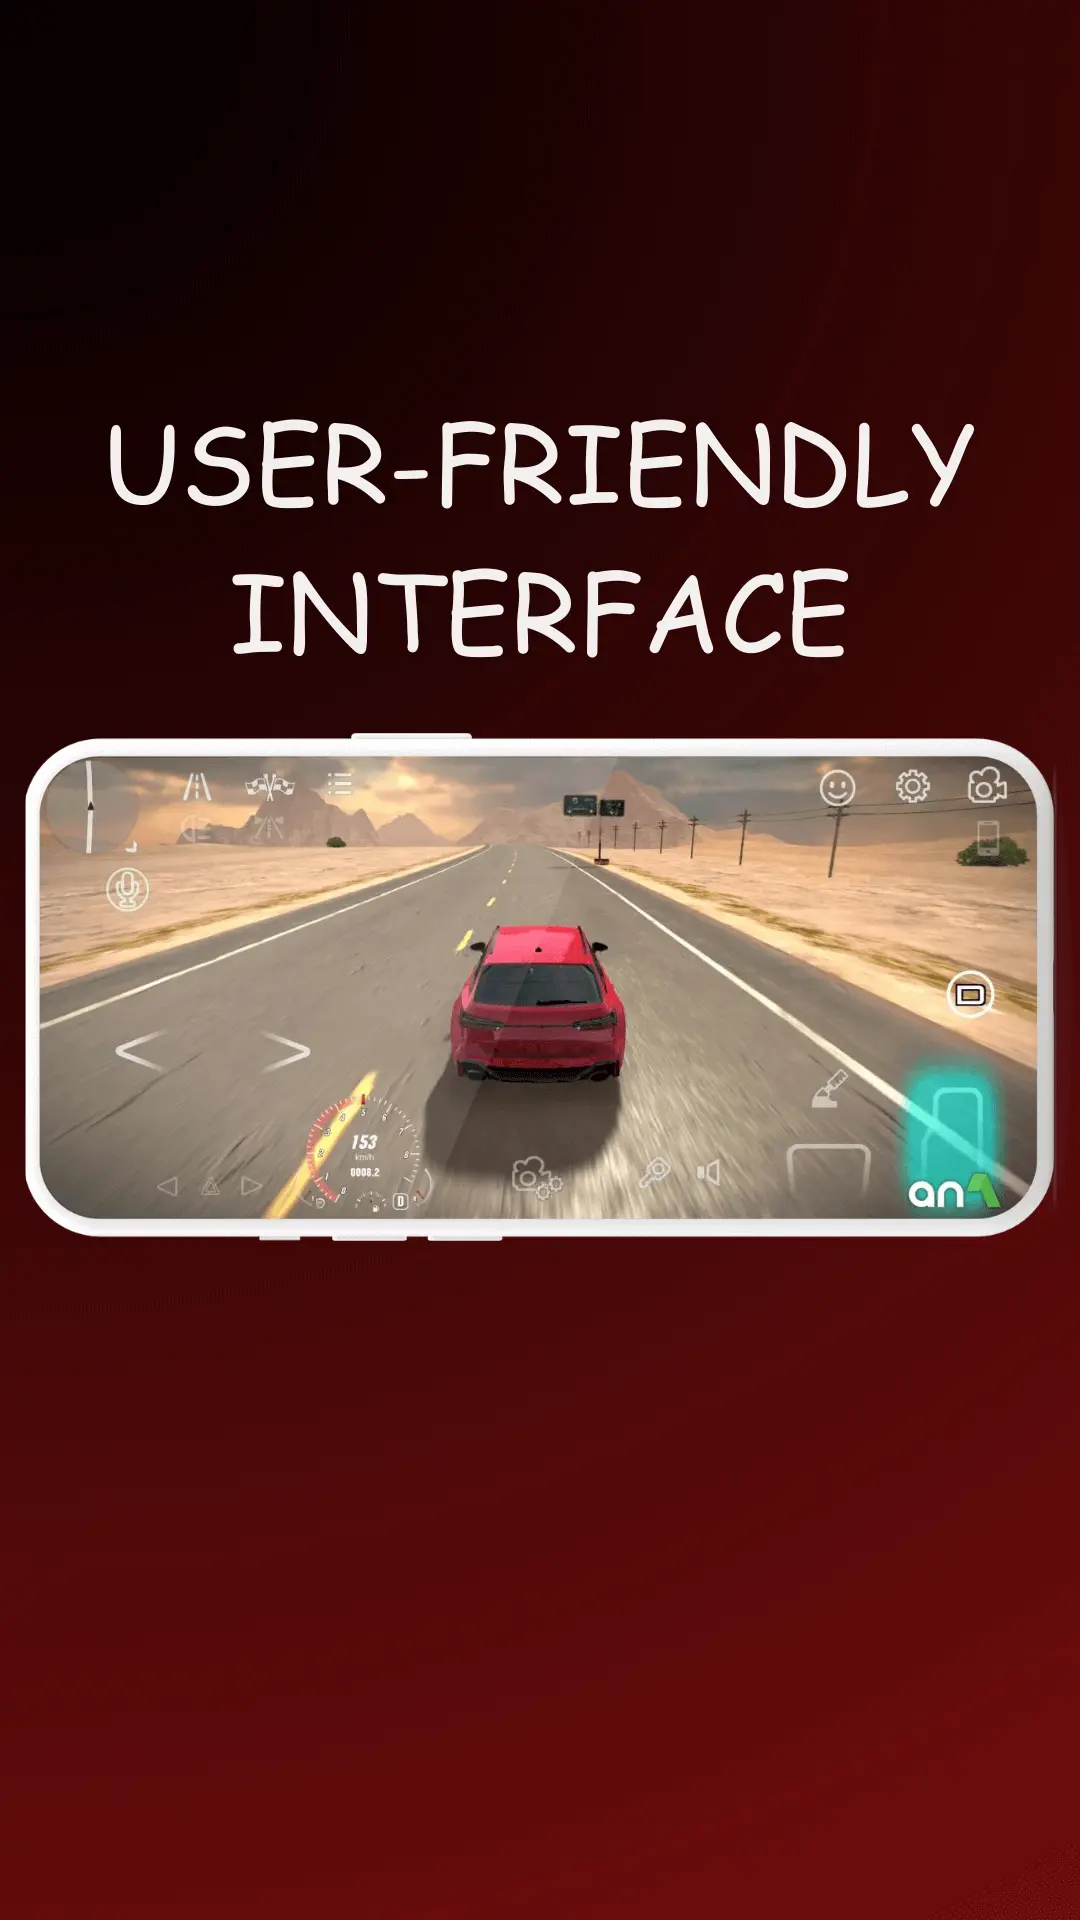 USER FRIENDLY INTERFACE